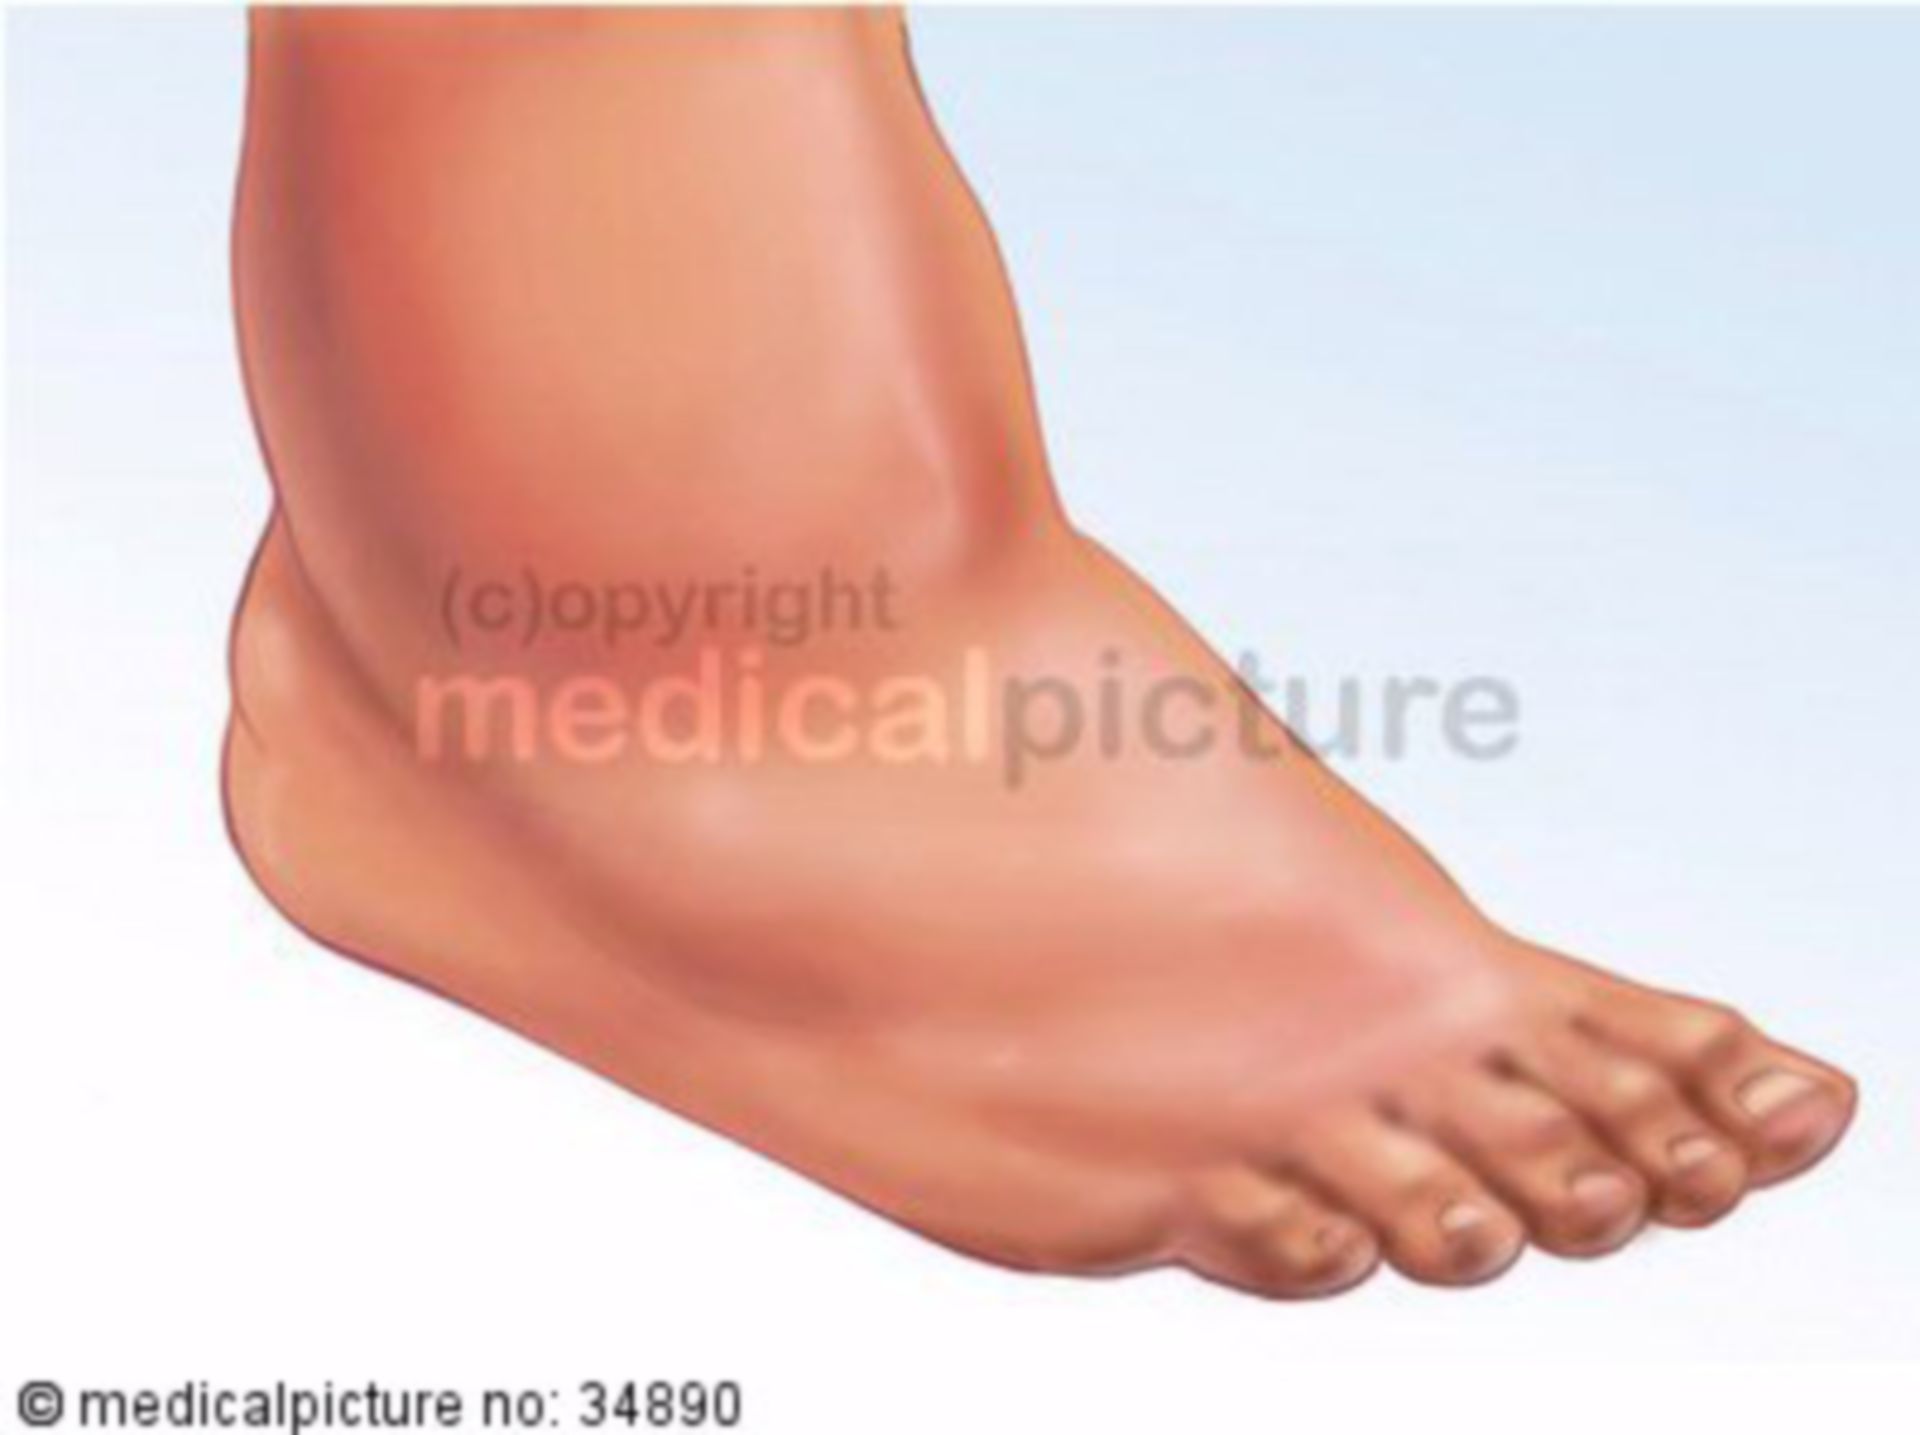 Diabetic foot syndrome Charcot foot